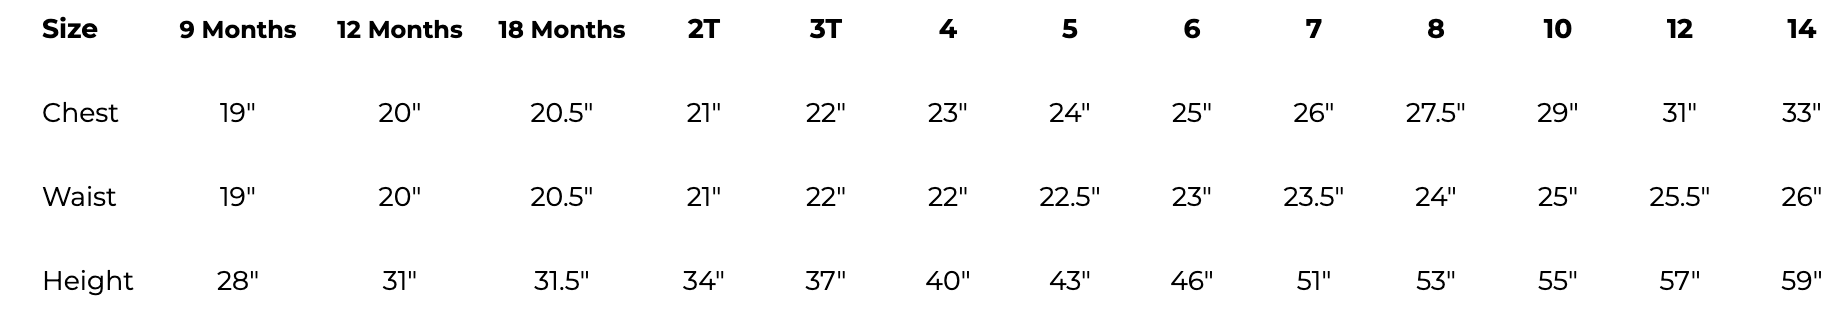 Size Chart for Children's Clothing in Inches